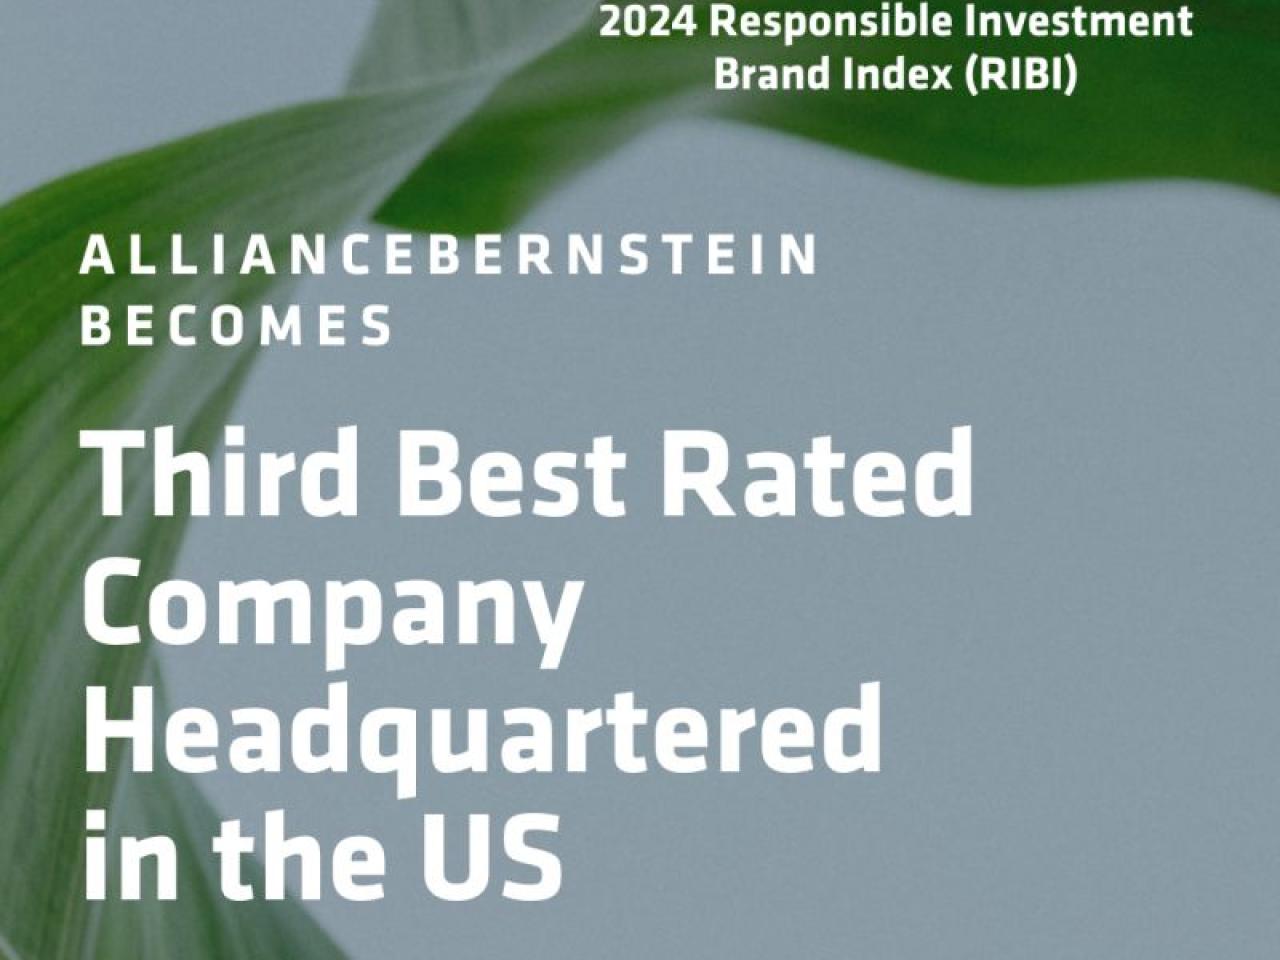 "2024 Responsible Investment Brand Index. AllianceBernstein Becomes Third Best Rated Company Headquartered in the US."